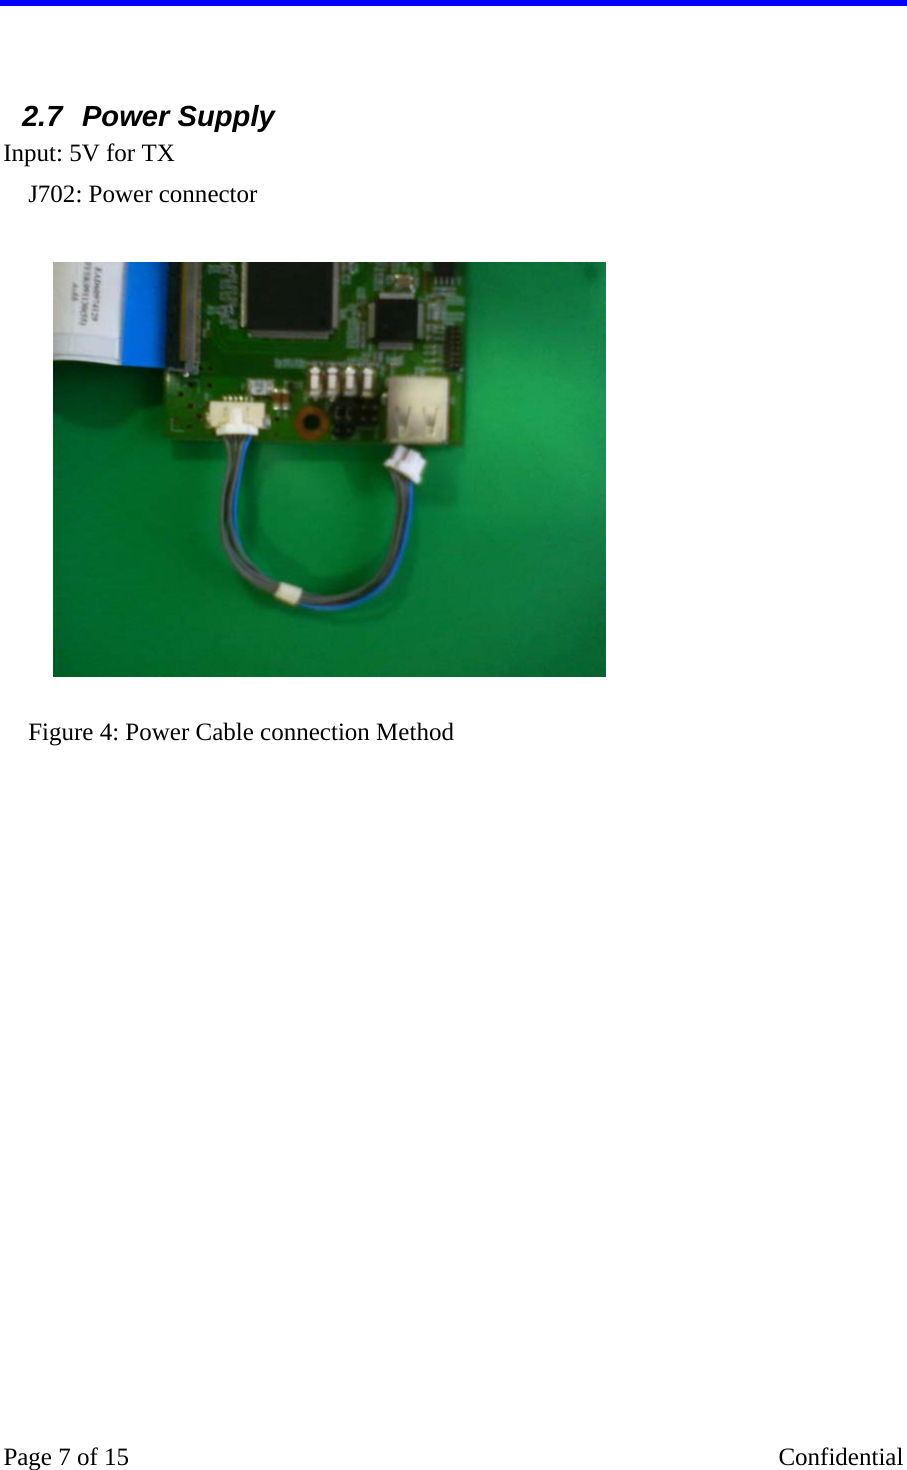    Page 7 of 15    Confidential  2.7  Power Supply   Input: 5V for TX     J702: Power connector    Figure 4: Power Cable connection Method  